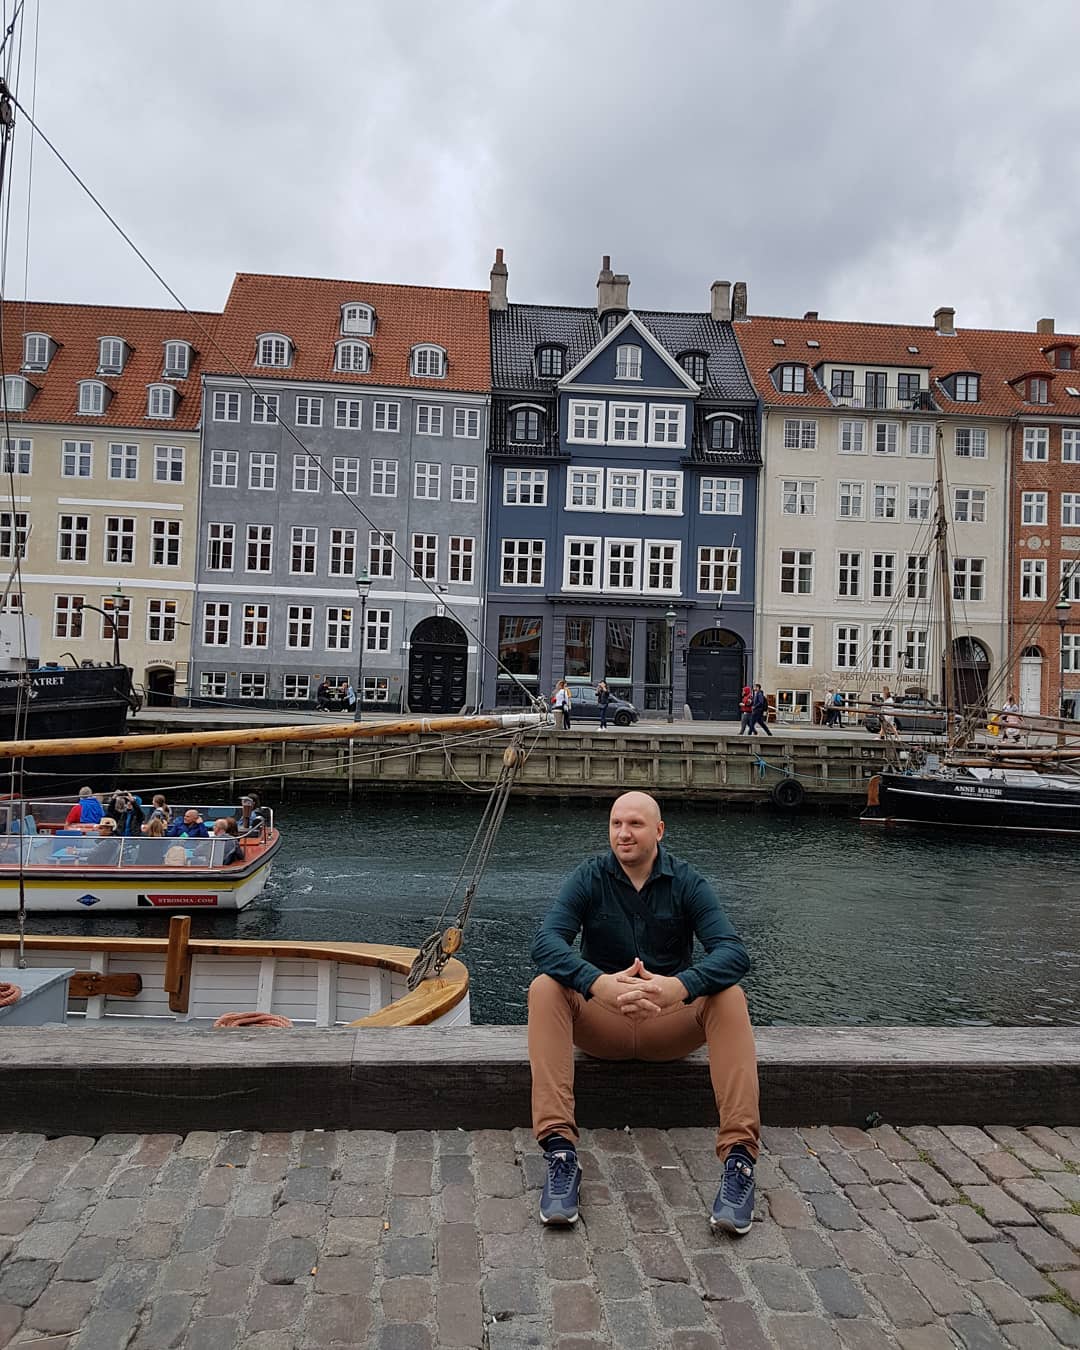 The row of colourful townhouses along the Nyhavn canal makes the perfect backdrop for photos.